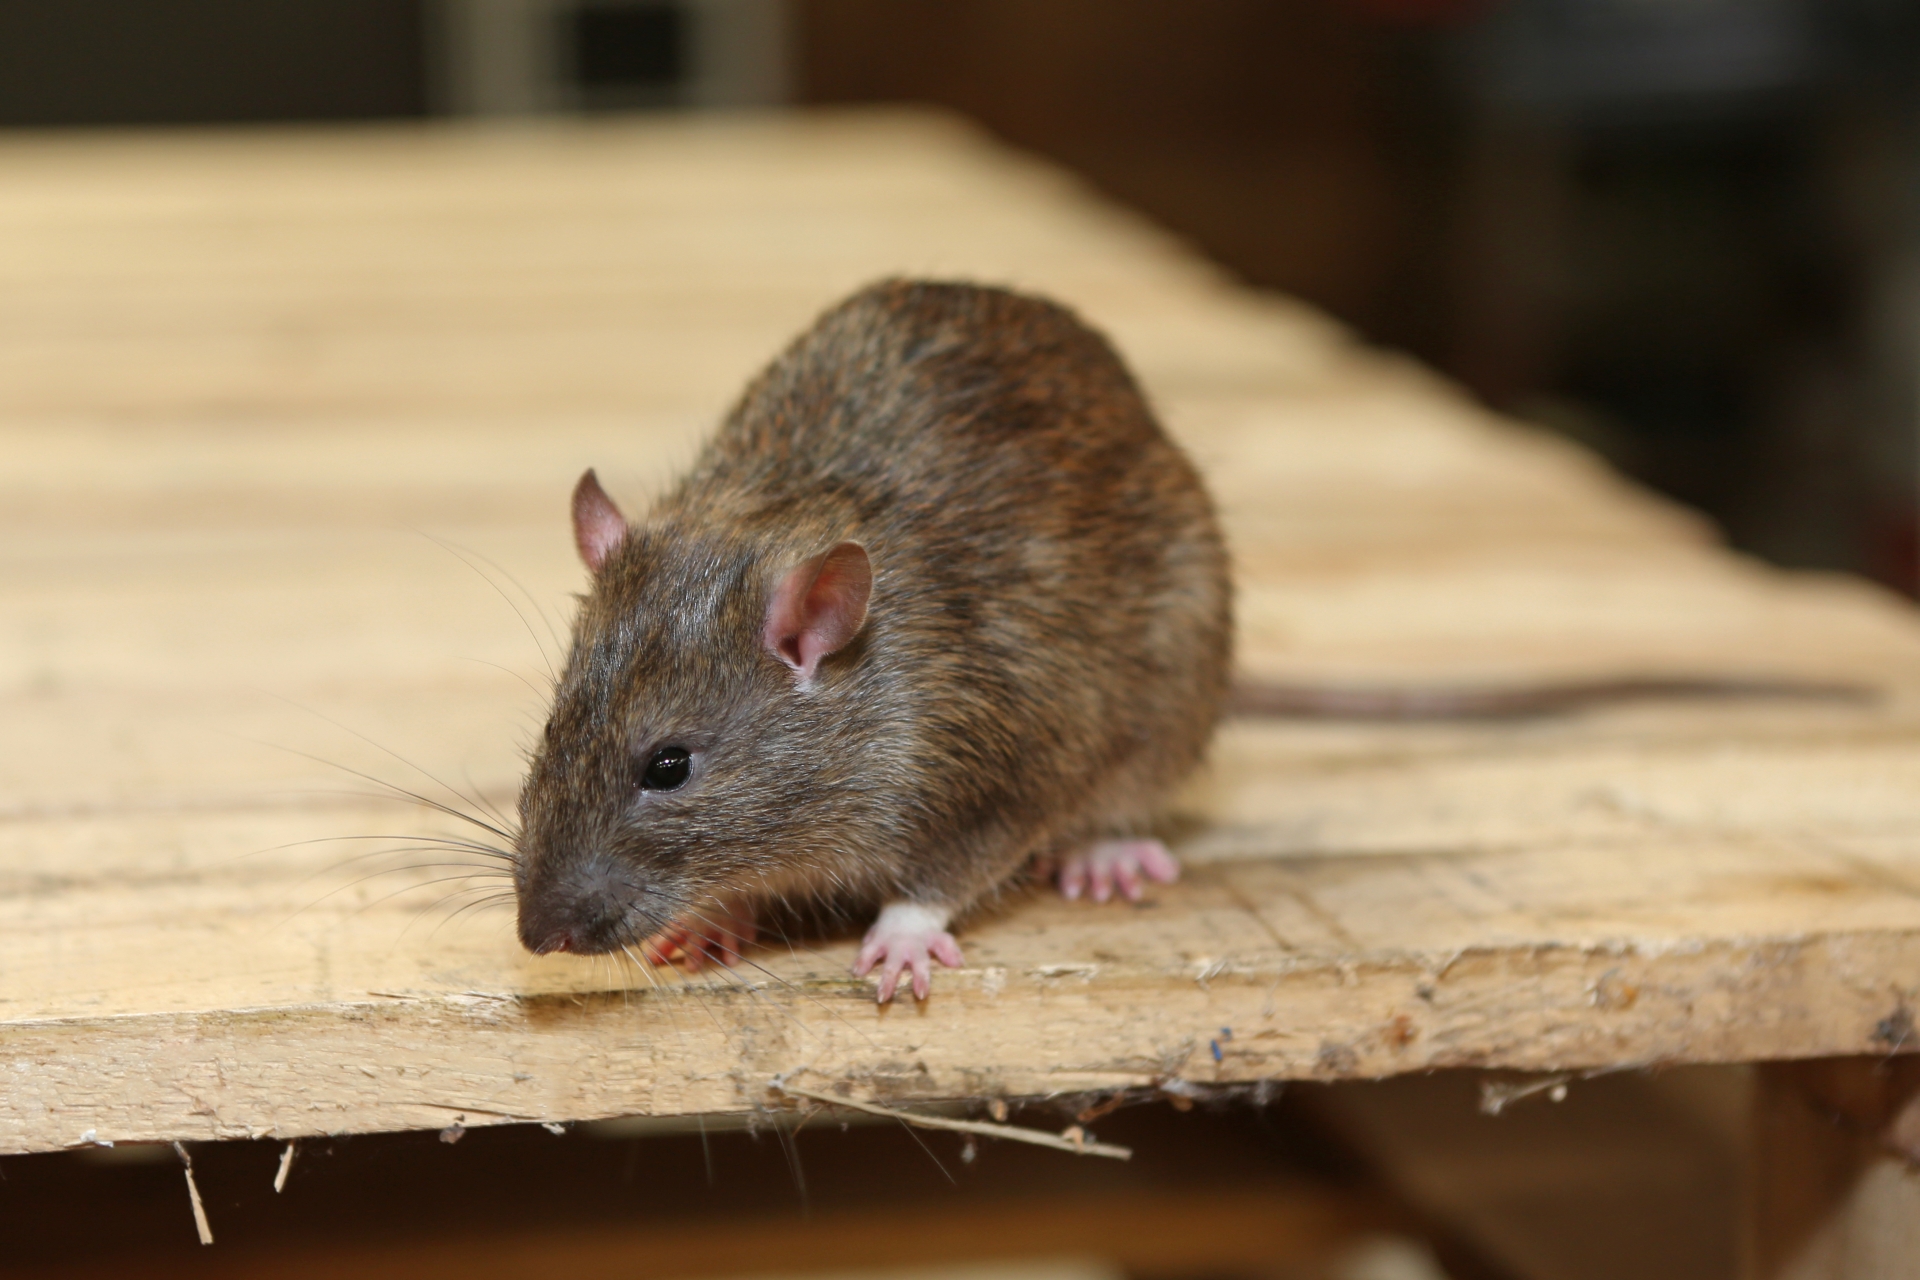 Rat Control, Pest Control in Oxhey, South Oxhey, WD19. Call Now 020 8166 9746